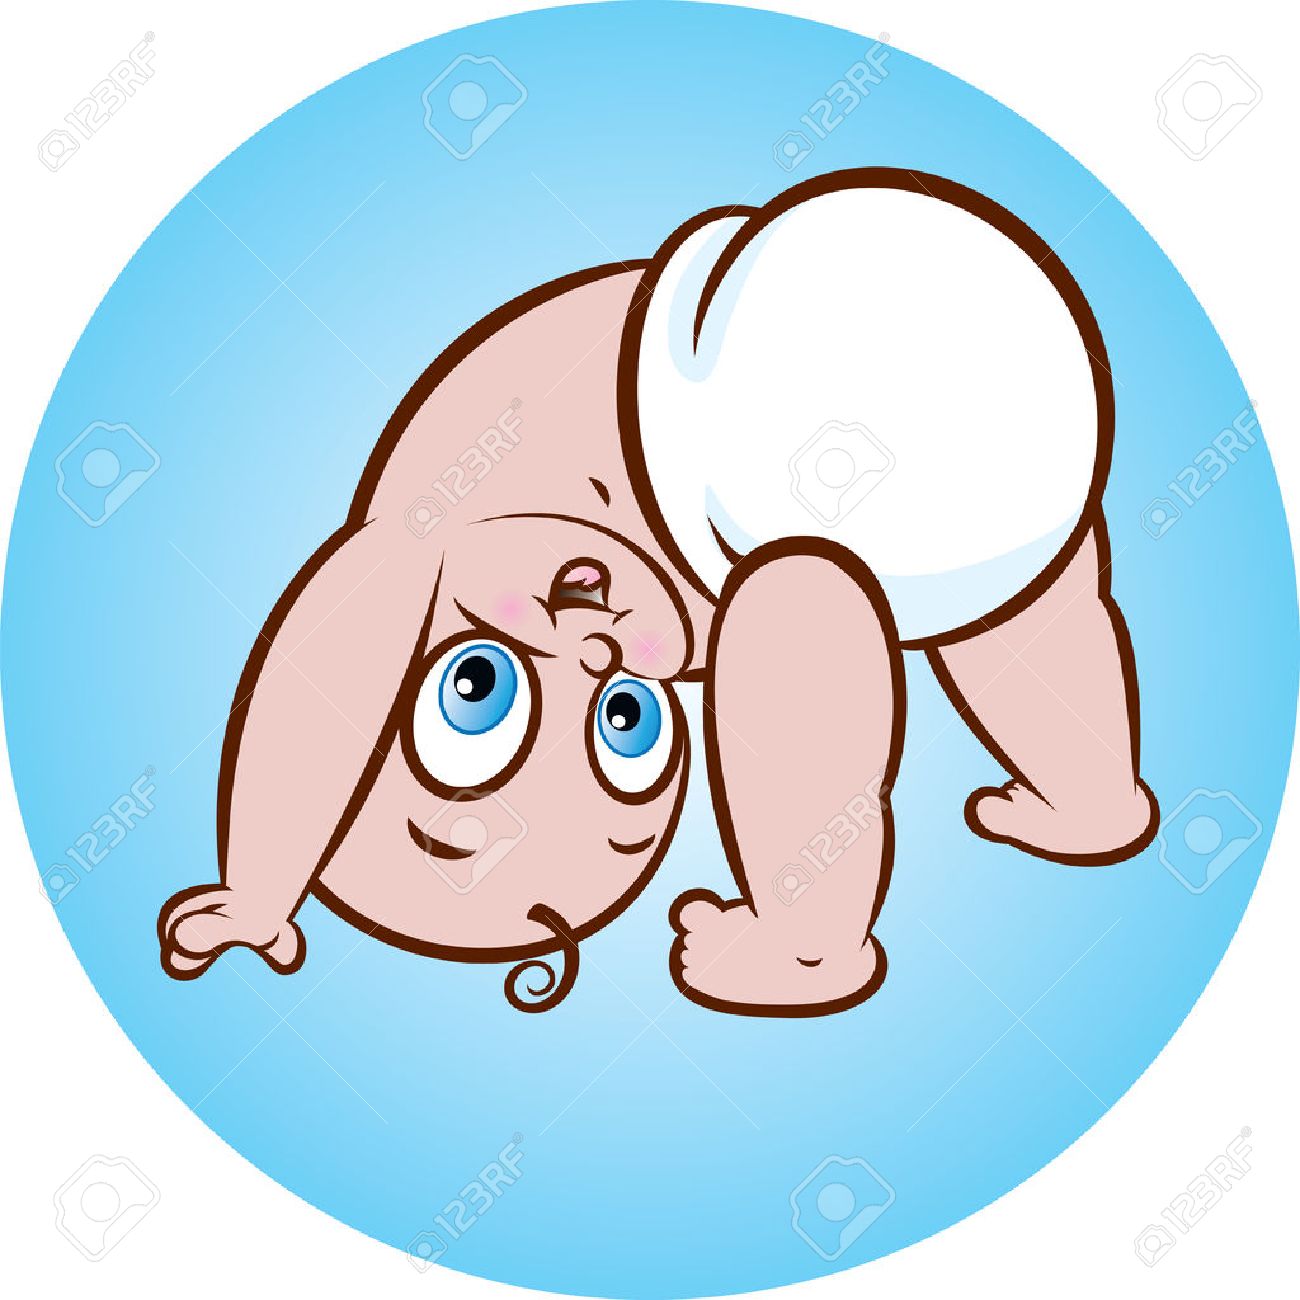 diapers clipart baby's